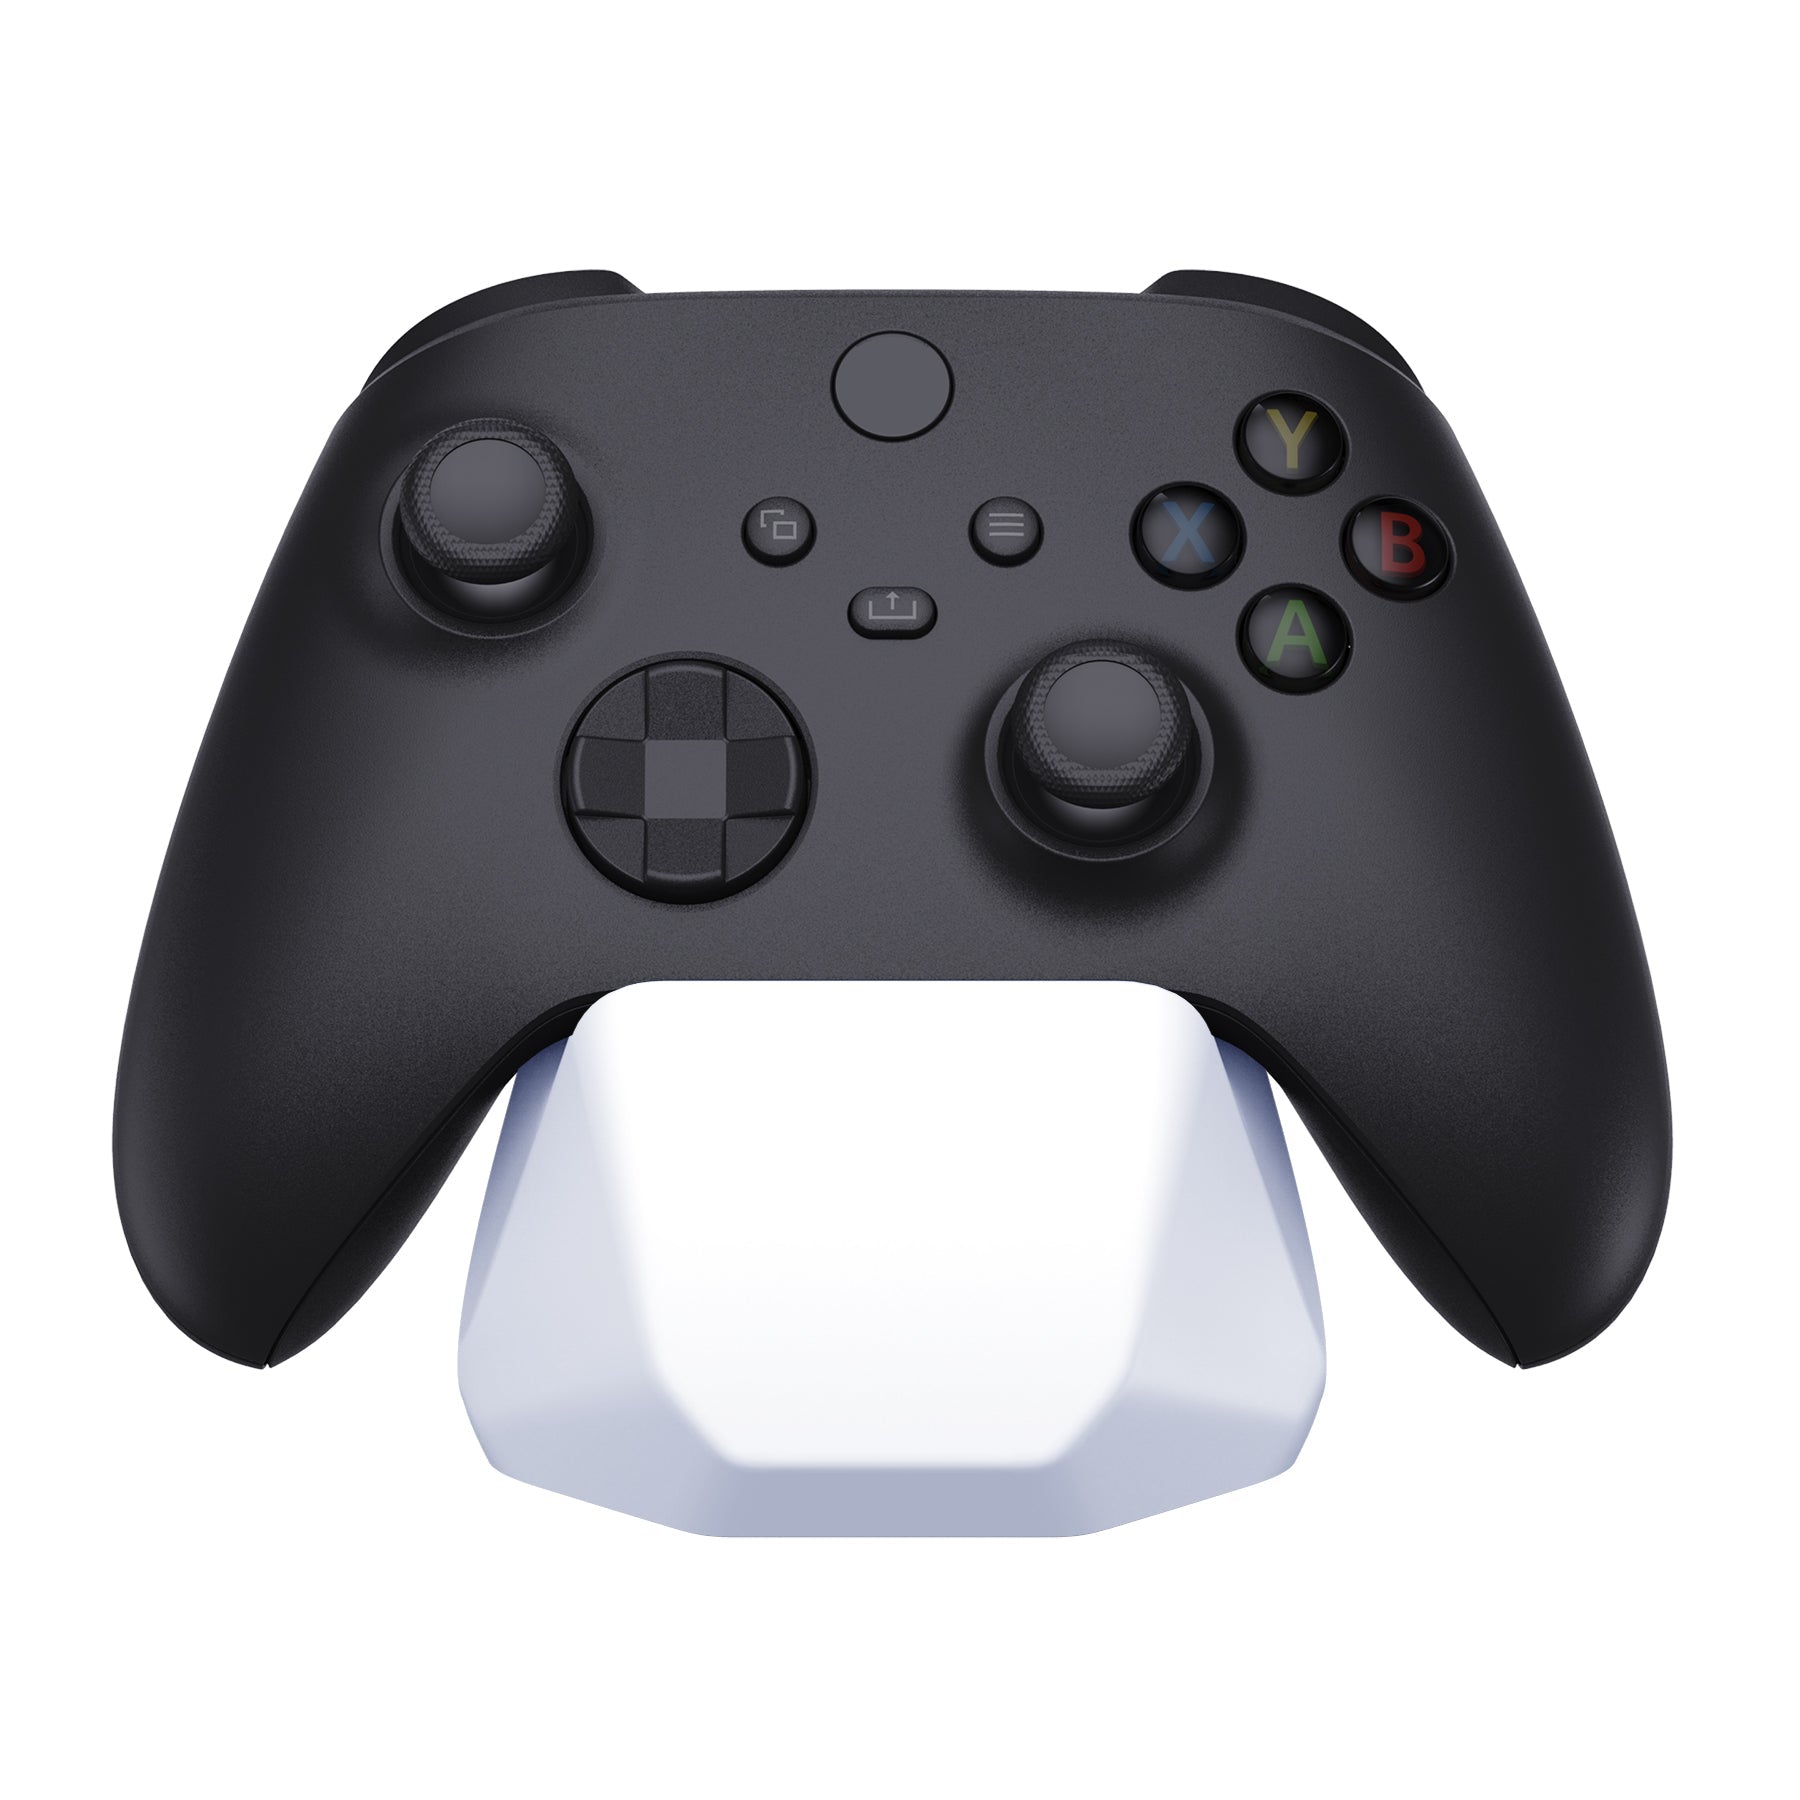 PlayVital White Universal Game Controller Stand for – playvital